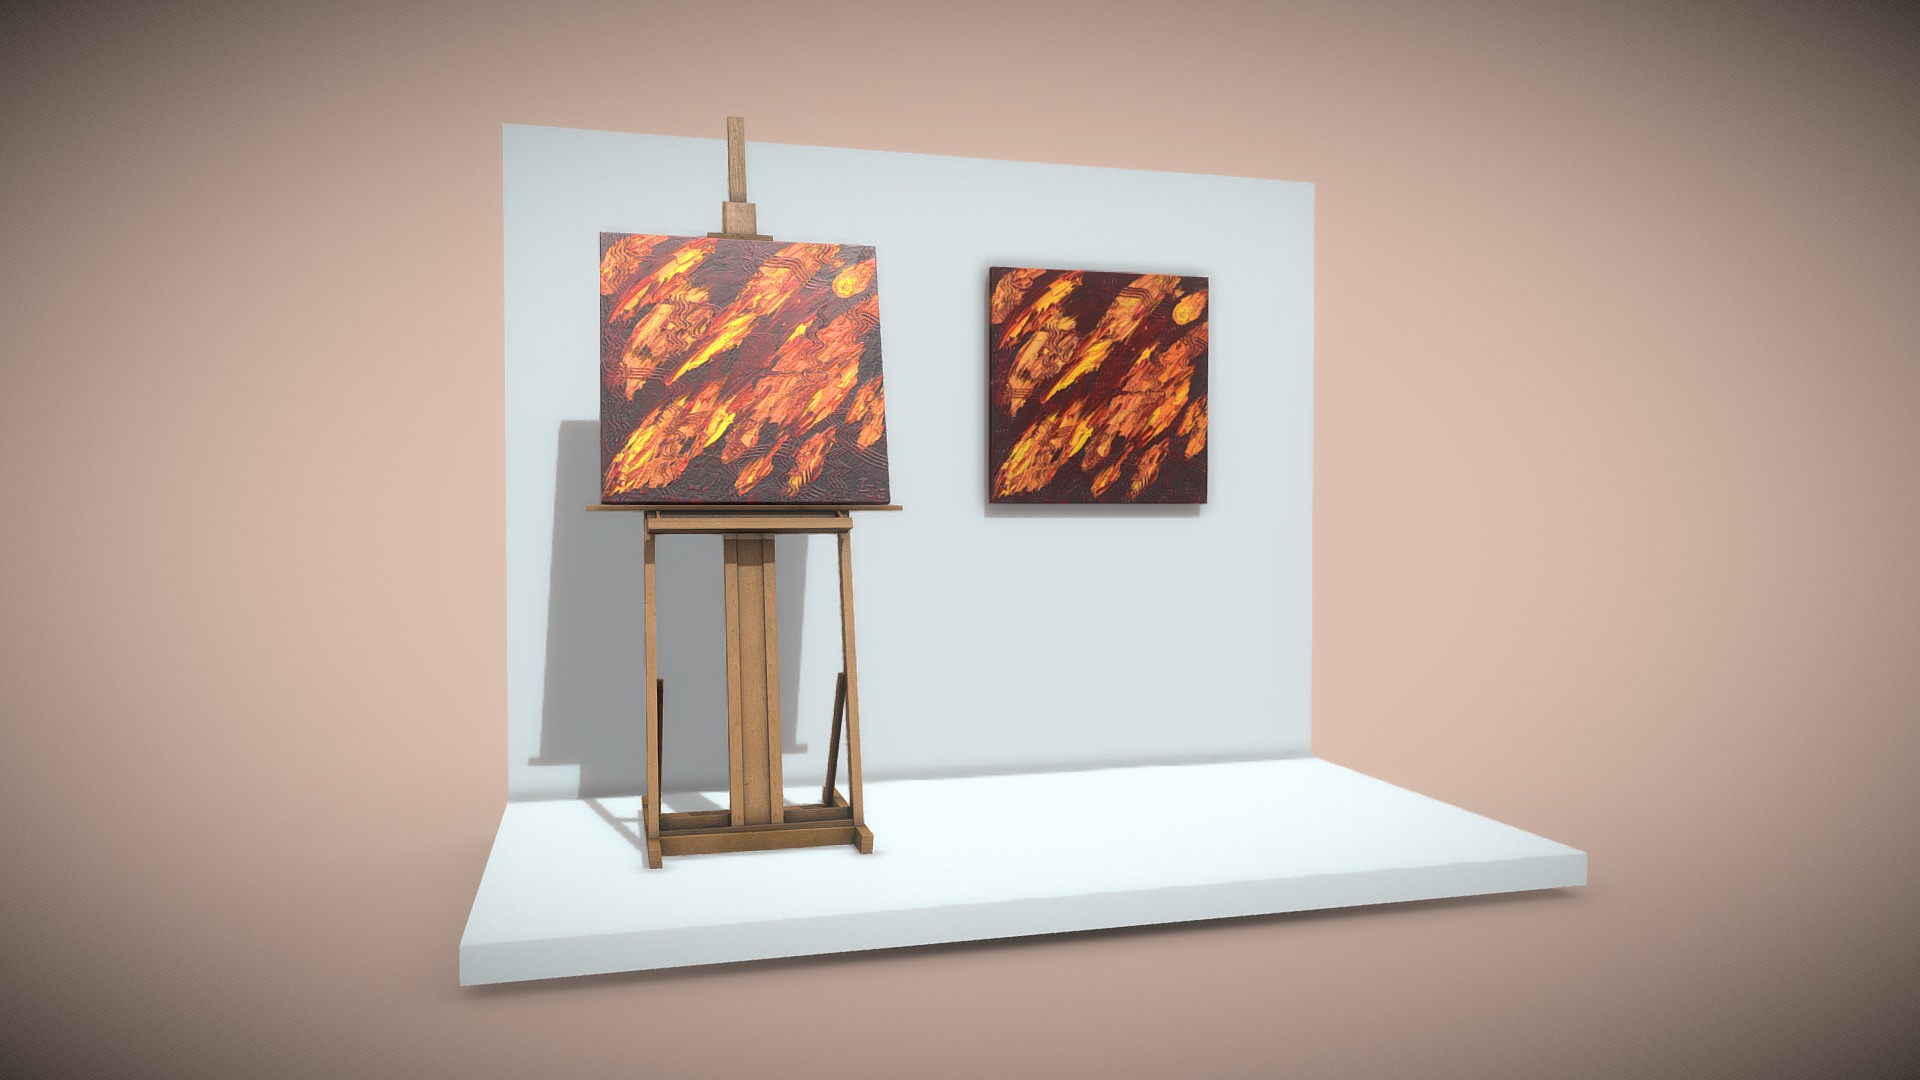 3D model Red Row No.1 – Oil Painting - This is a 3D model of the Red Row No.1 - Oil Painting. The 3D model is about a painting on a wall.